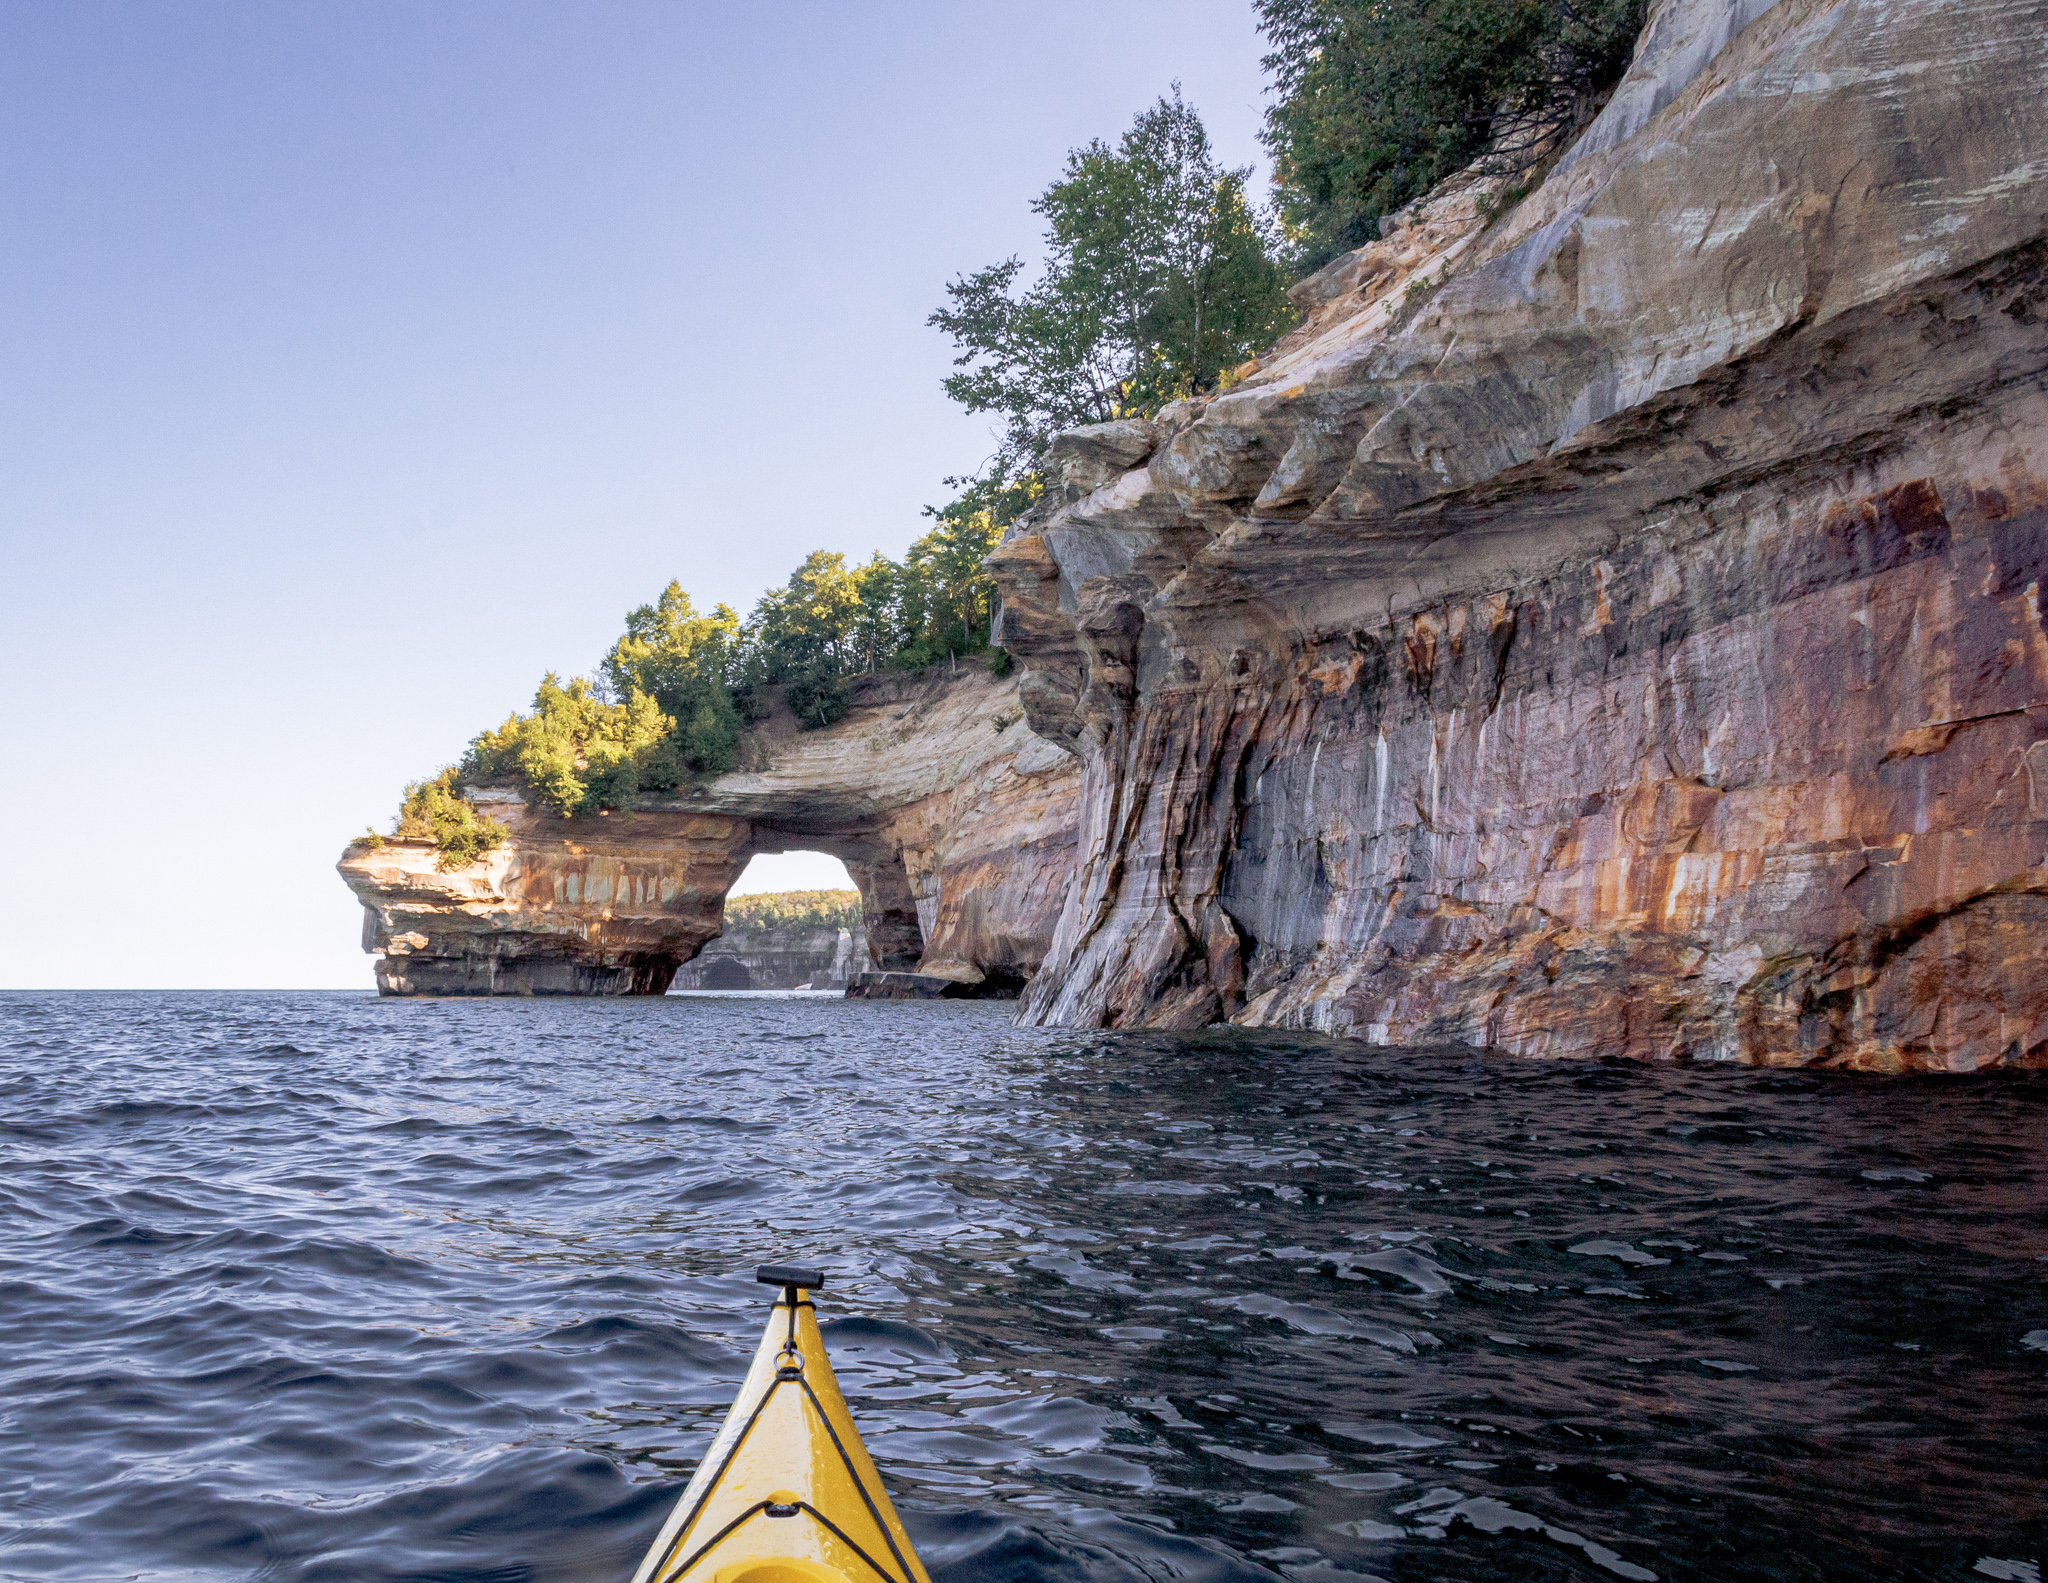 A yellow kayak on Lake Superior under the Pictured Rocks Cliffs